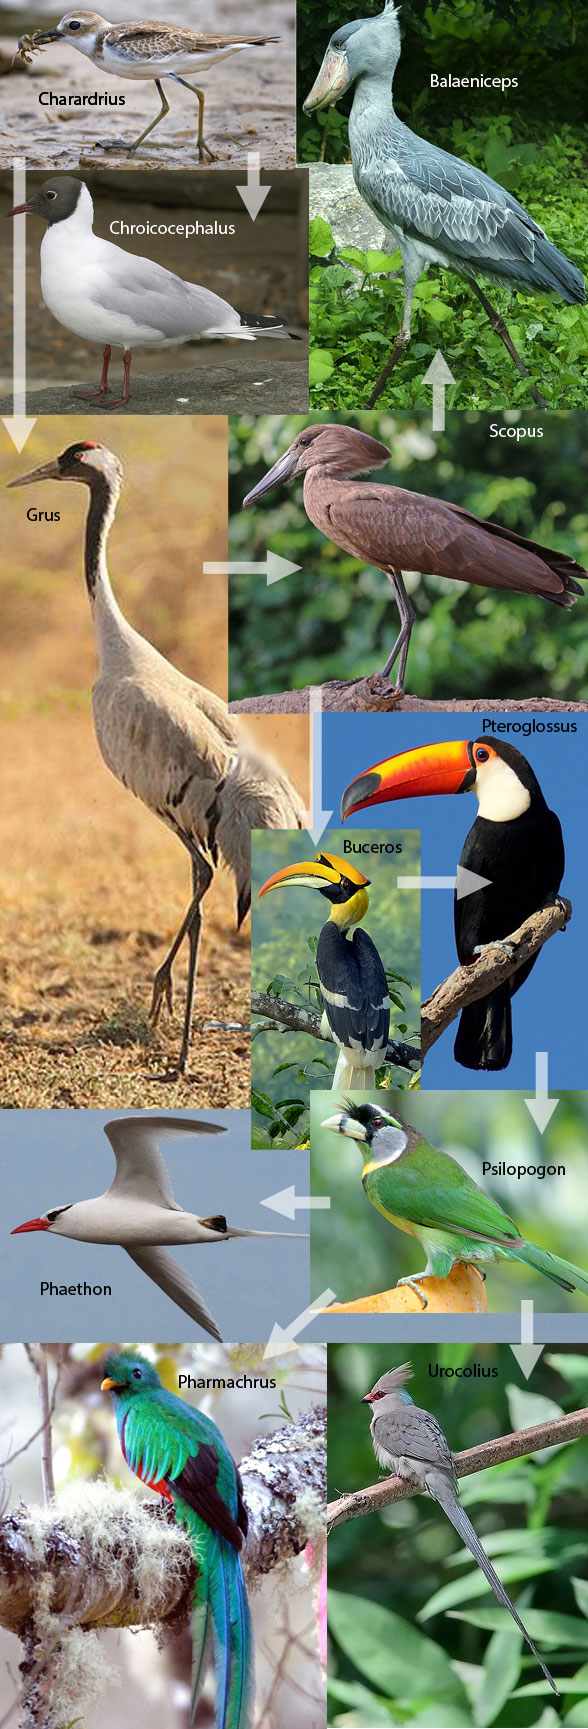 Figure 1. Evolution of birds from plover to quetzal according to the LRT.